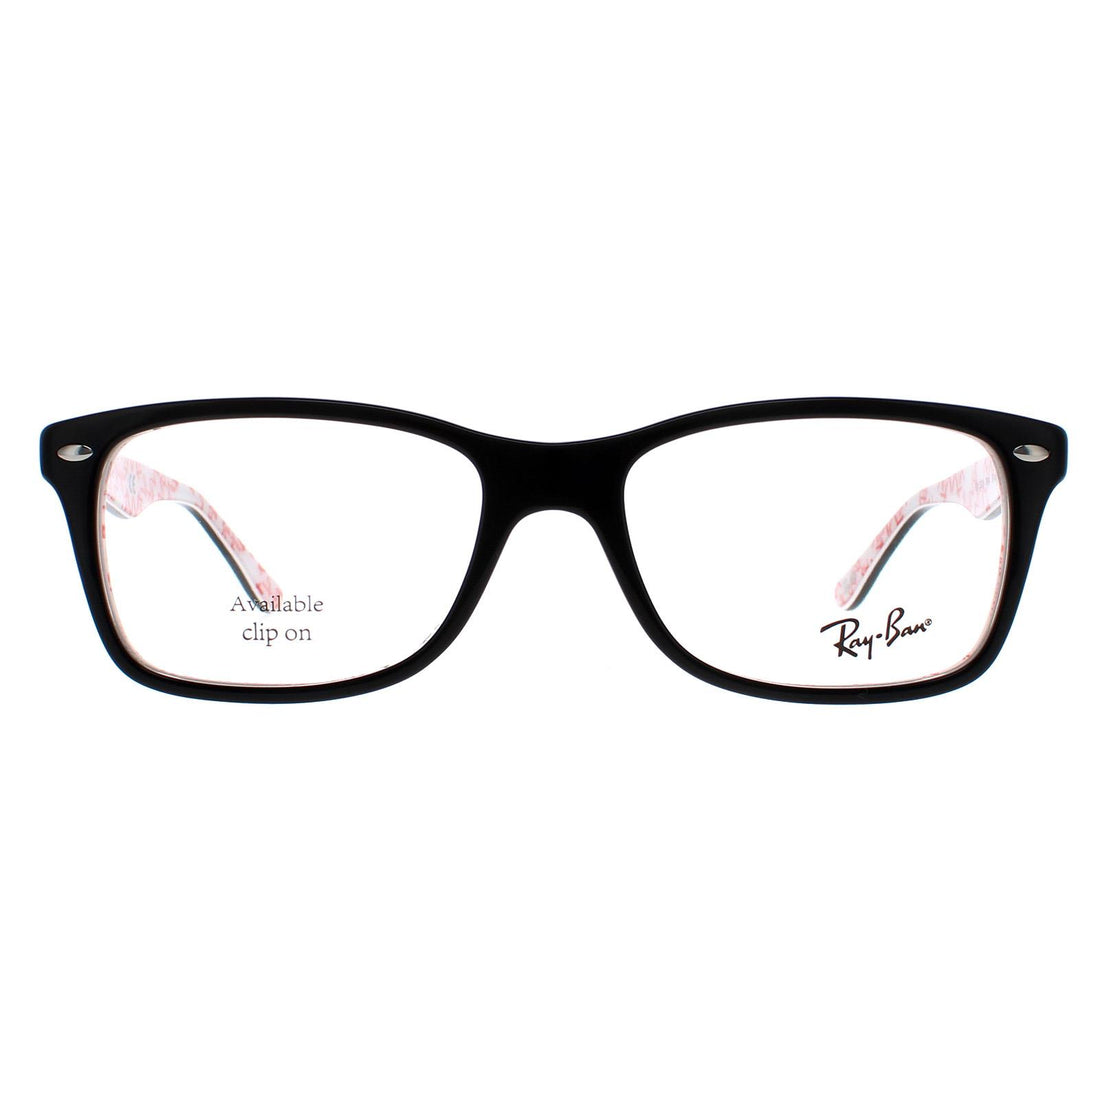 Ray-Ban 5228 Glasses Top Black On Texture White 53